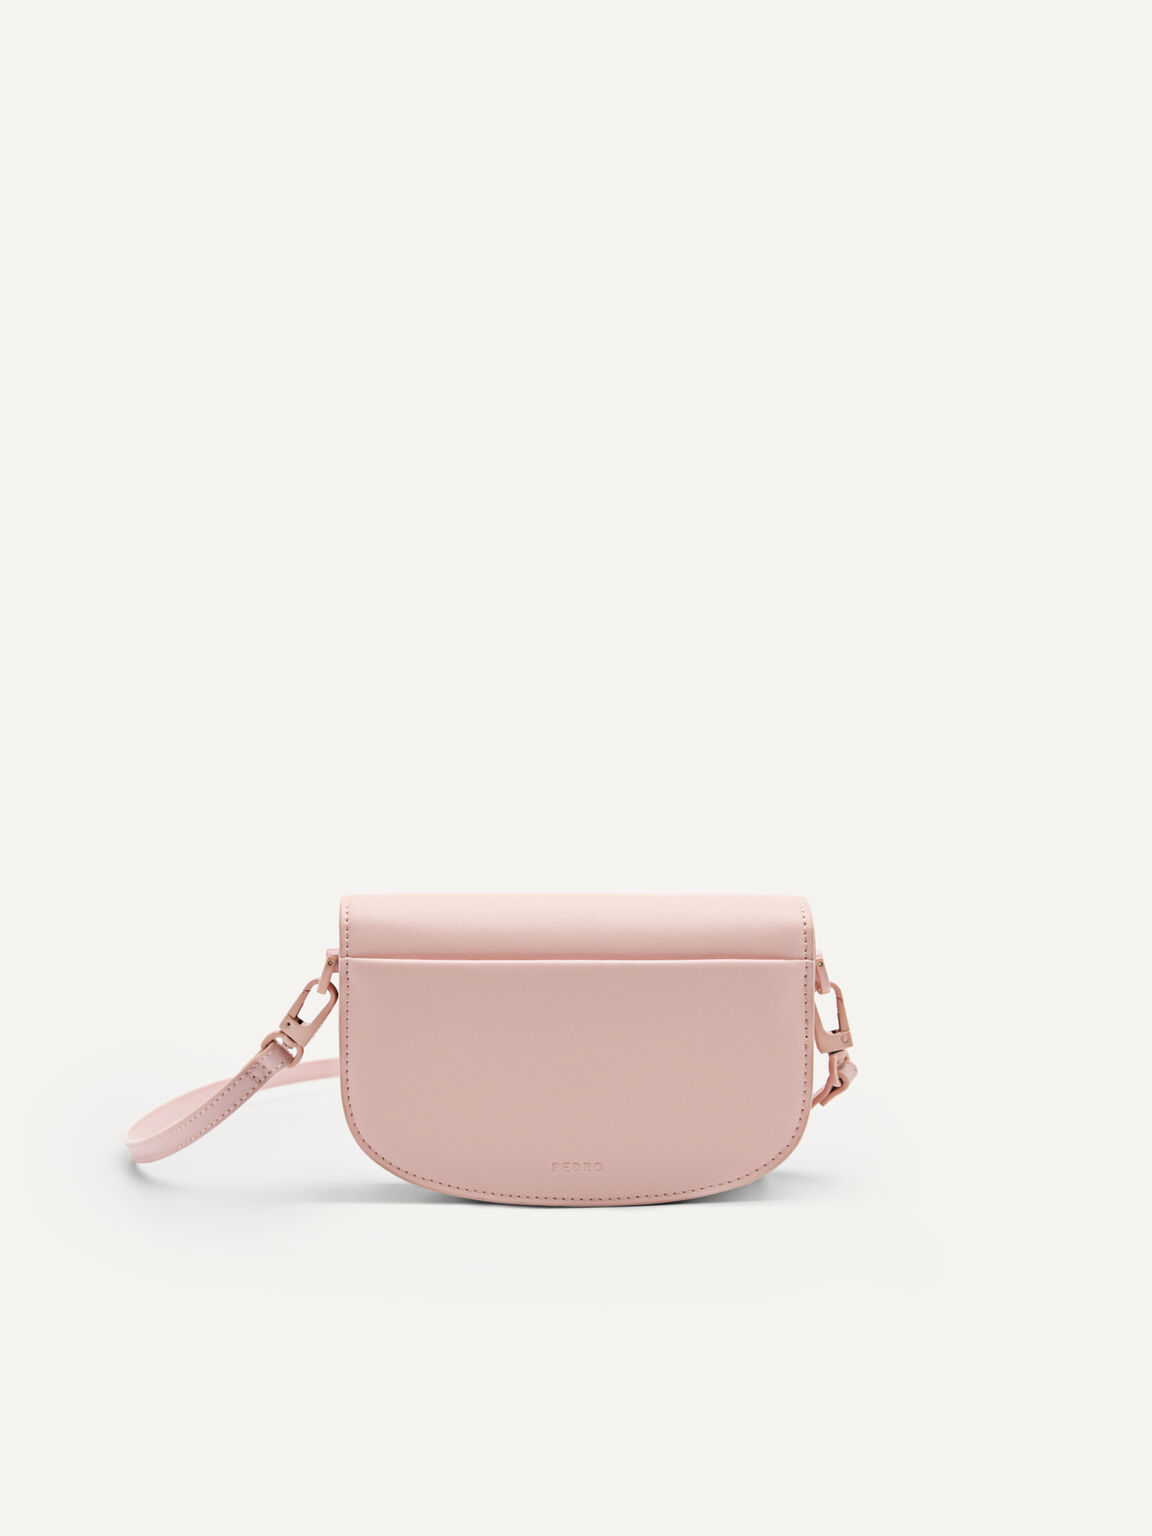 Pedro Icon Leather Tote Bag - Pink